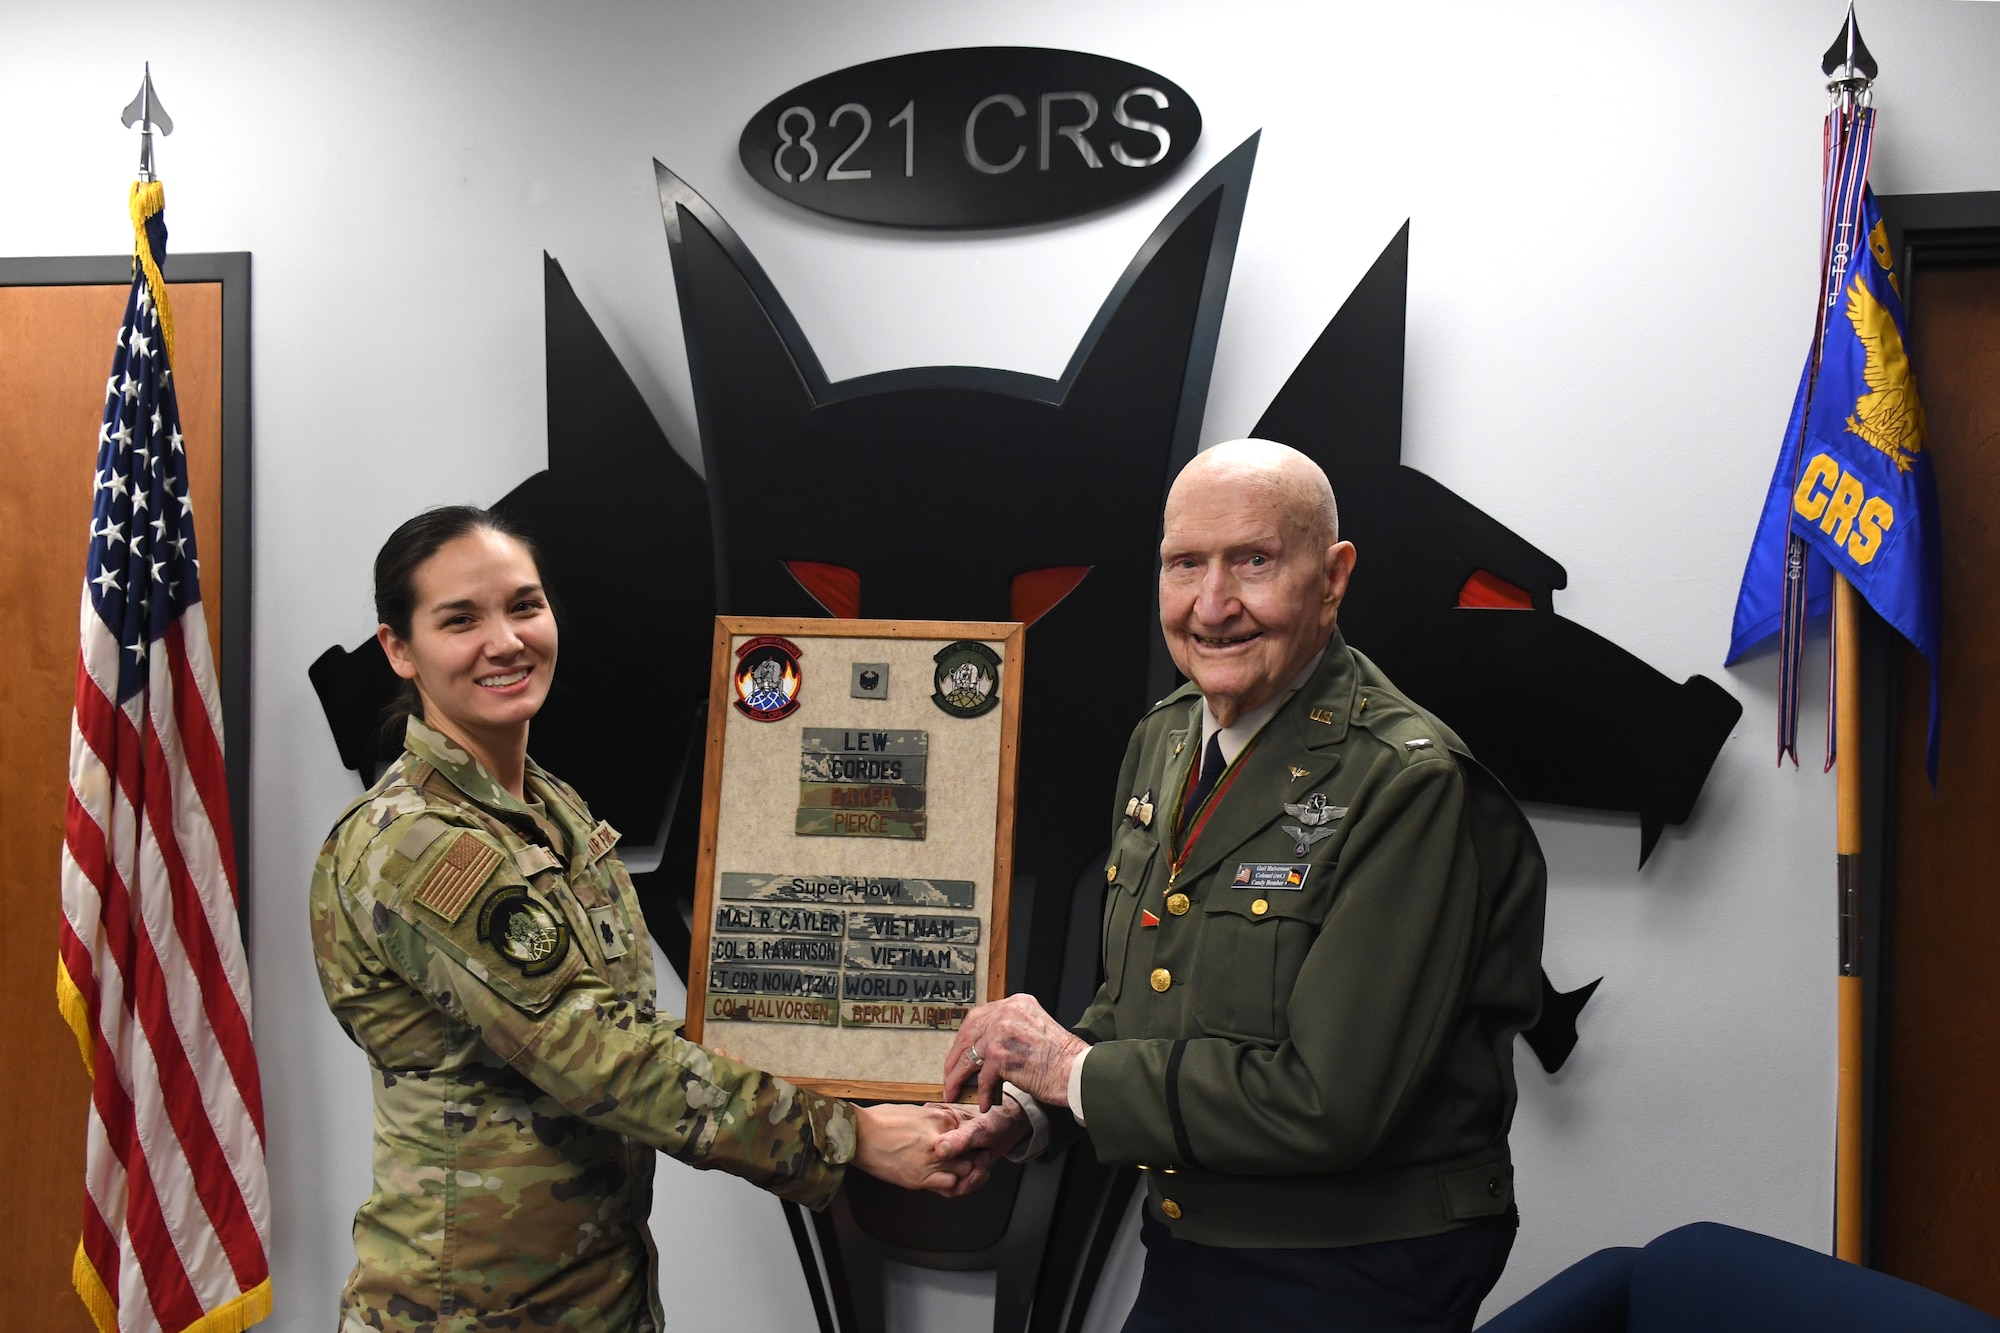 U.S. Air Force Lt. Col. Christina Lee, 821st Contingency Response Squadron commander, and retired Col. Gail S. Halvorsen, hold a plaque which displays Halvorsen’s name in recognition of his legacy as Berlin’s Candy Bomber, Jan. 31, 2020, Travis Air Force Base, California. The 99-year old war hero shared his amazing story with the Airmen and as a tribute to his legacy, he was inducted into the squadron's "Super Howl" hall of fame. The Super-Howl was initiated by the squadron as a way to recognize military veterans who visit their unit and have played an important role in the nation’s history. The squadron displays this honor on a plaque at the unit where they add the name of the inductee next to the operation he or she served in. (U.S. Air Force photo/ TSgt Liliana Moreno)